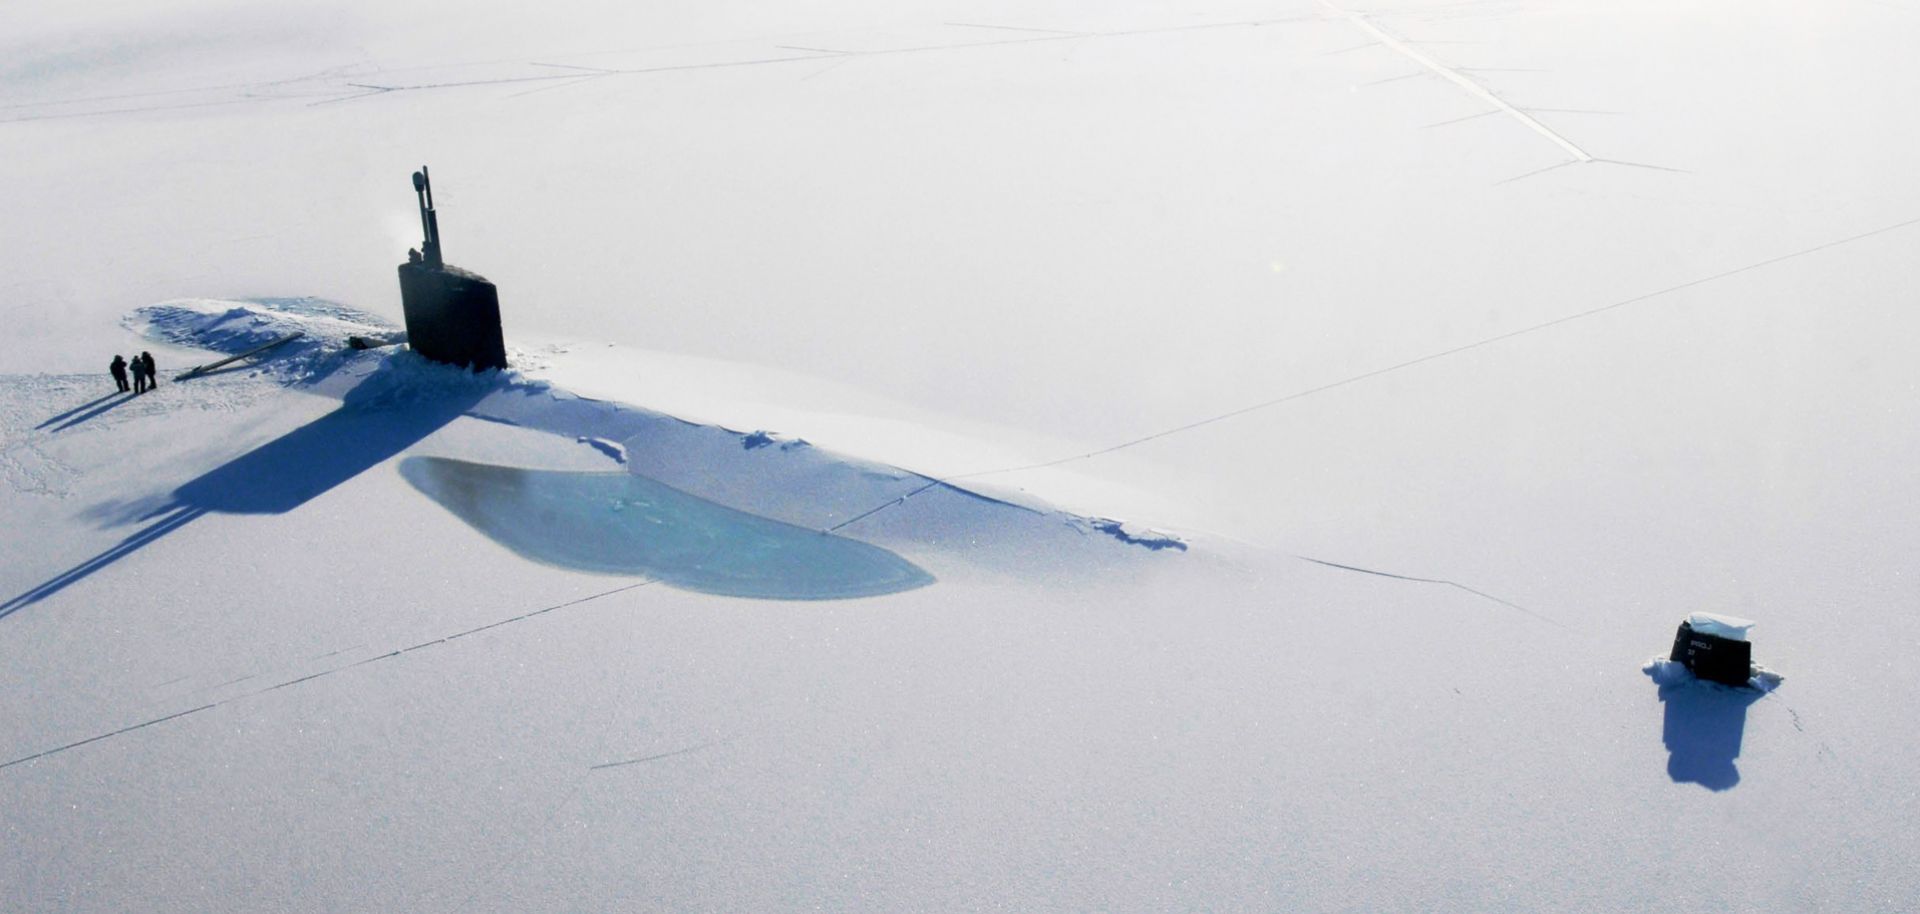 The Los Angeles-class submarine USS Annapolis (SSN 760) in the Arctic Ocean on March 21, 2009.